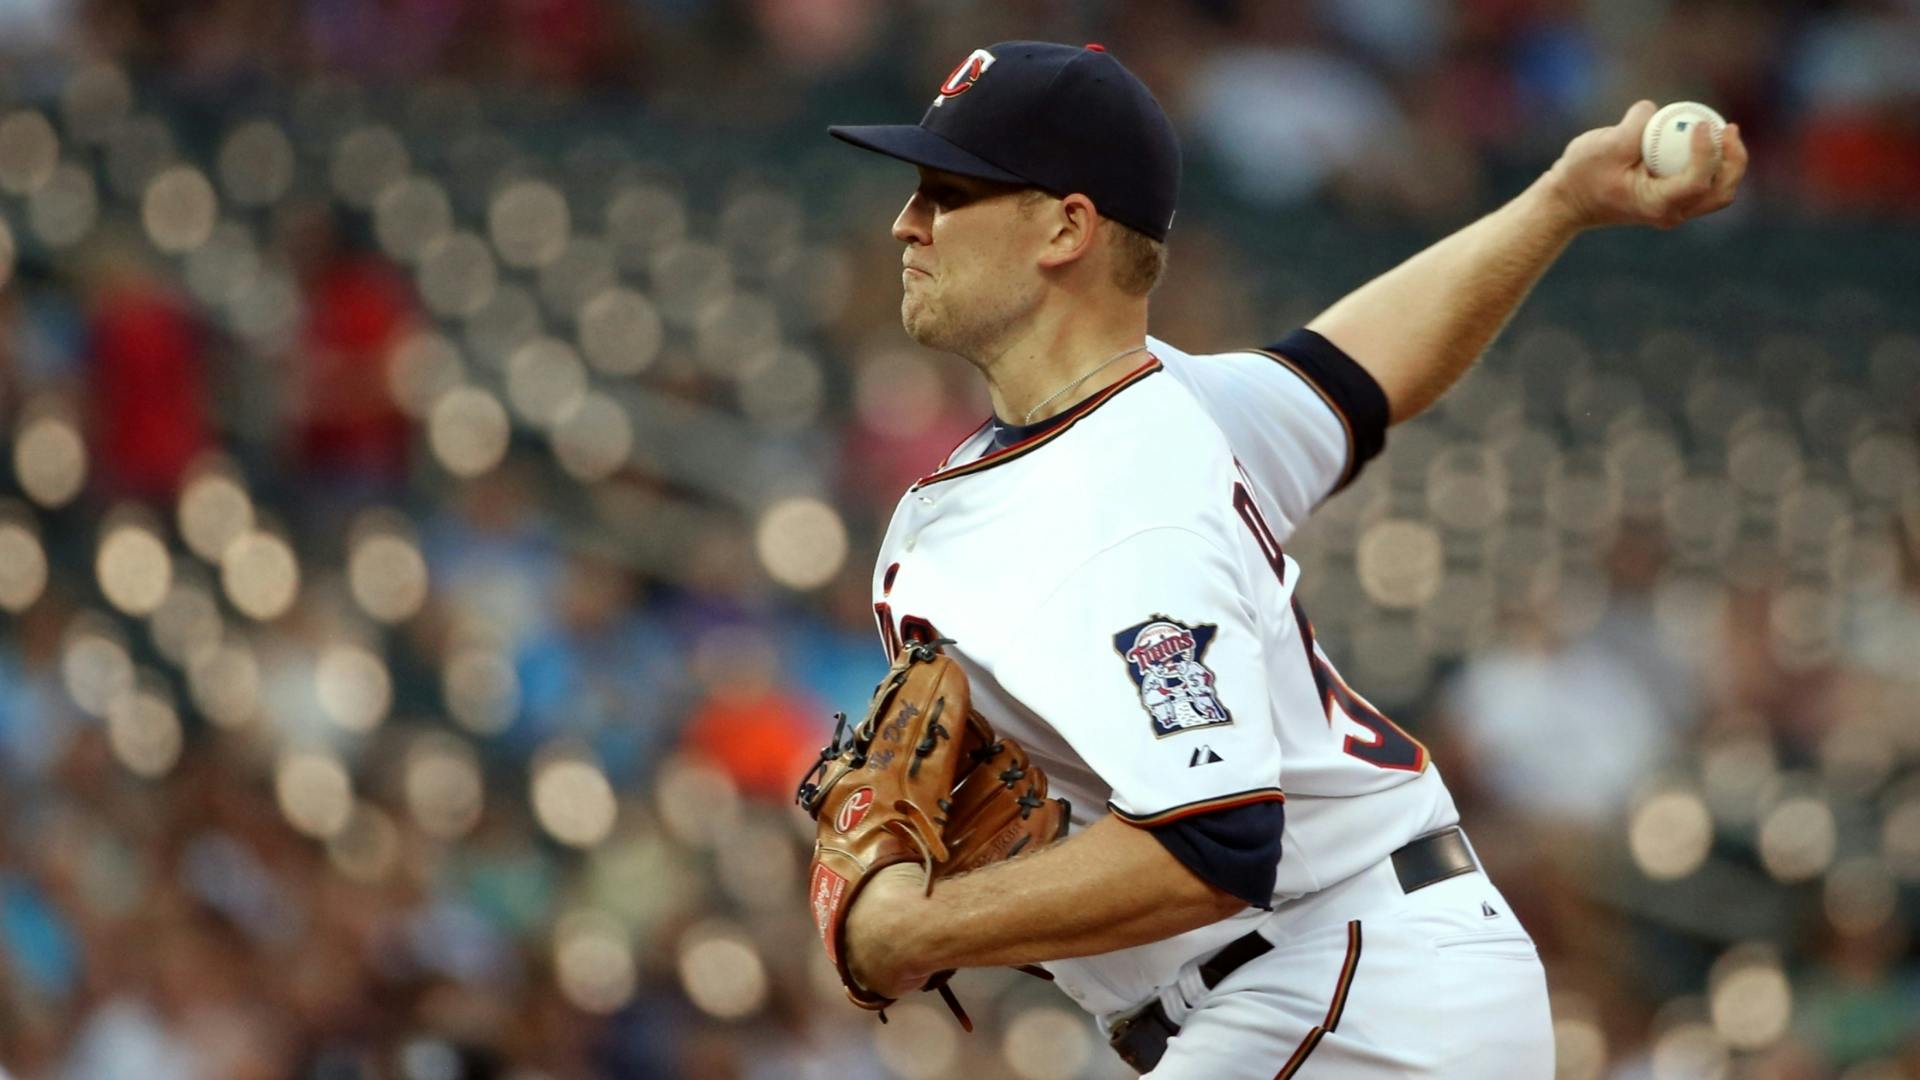 Twins rookie Tyler Duffey lost his command and got into trouble because of walks Tuesday night.